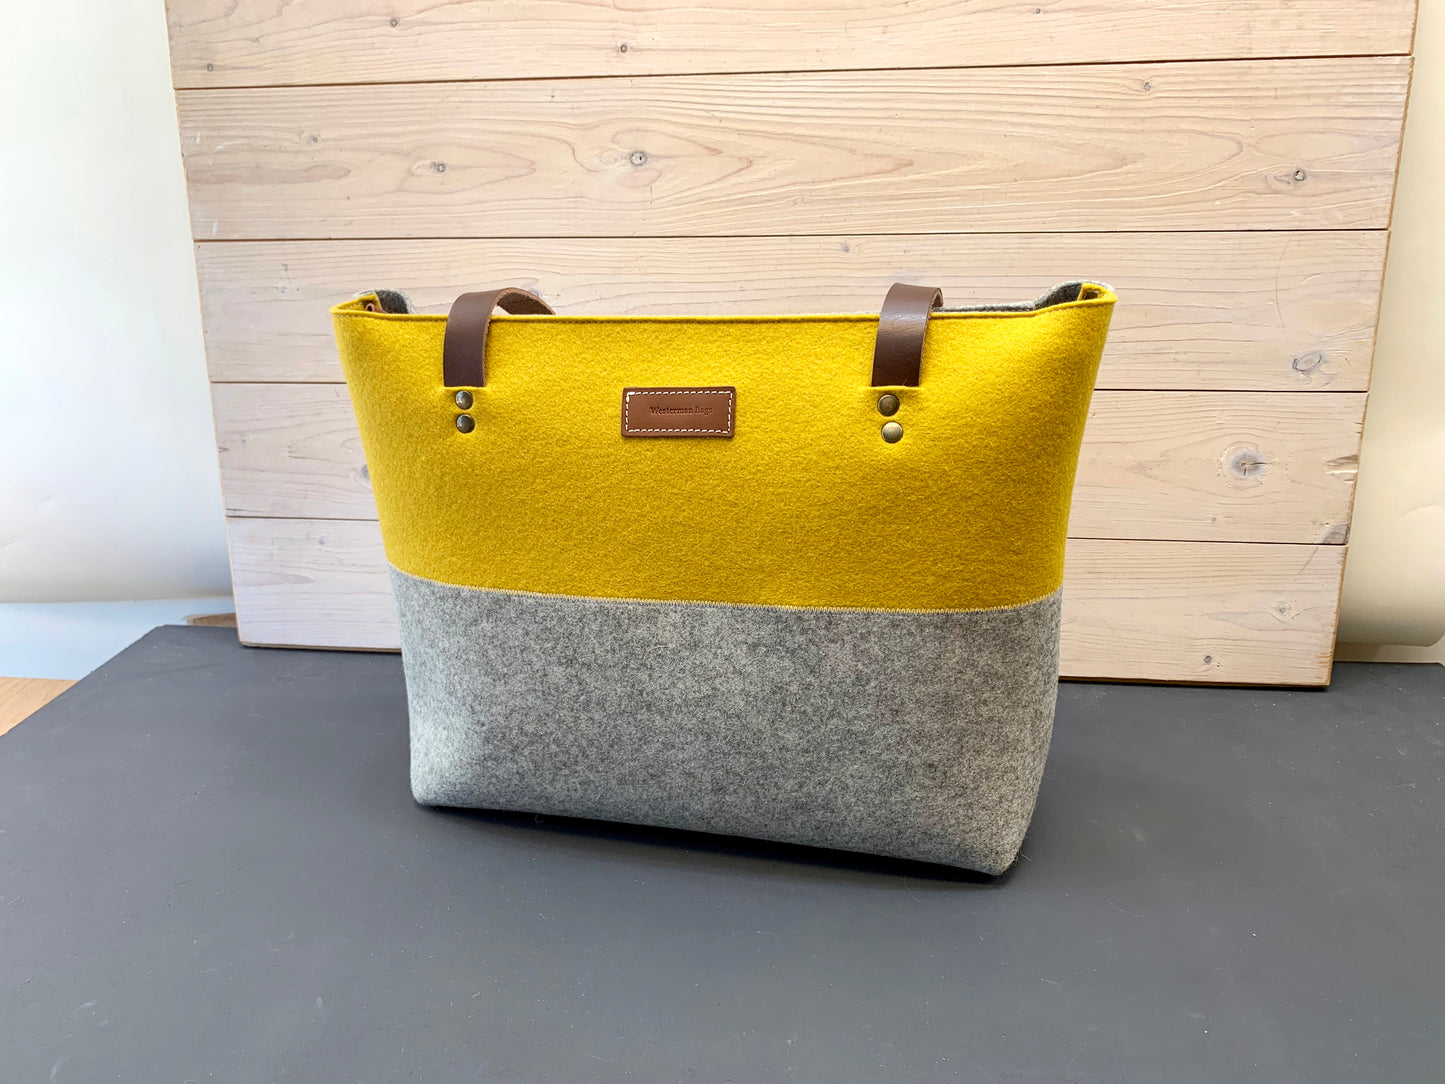 Westerman Bags pure wool felt bag shopper tote Grey and yellow